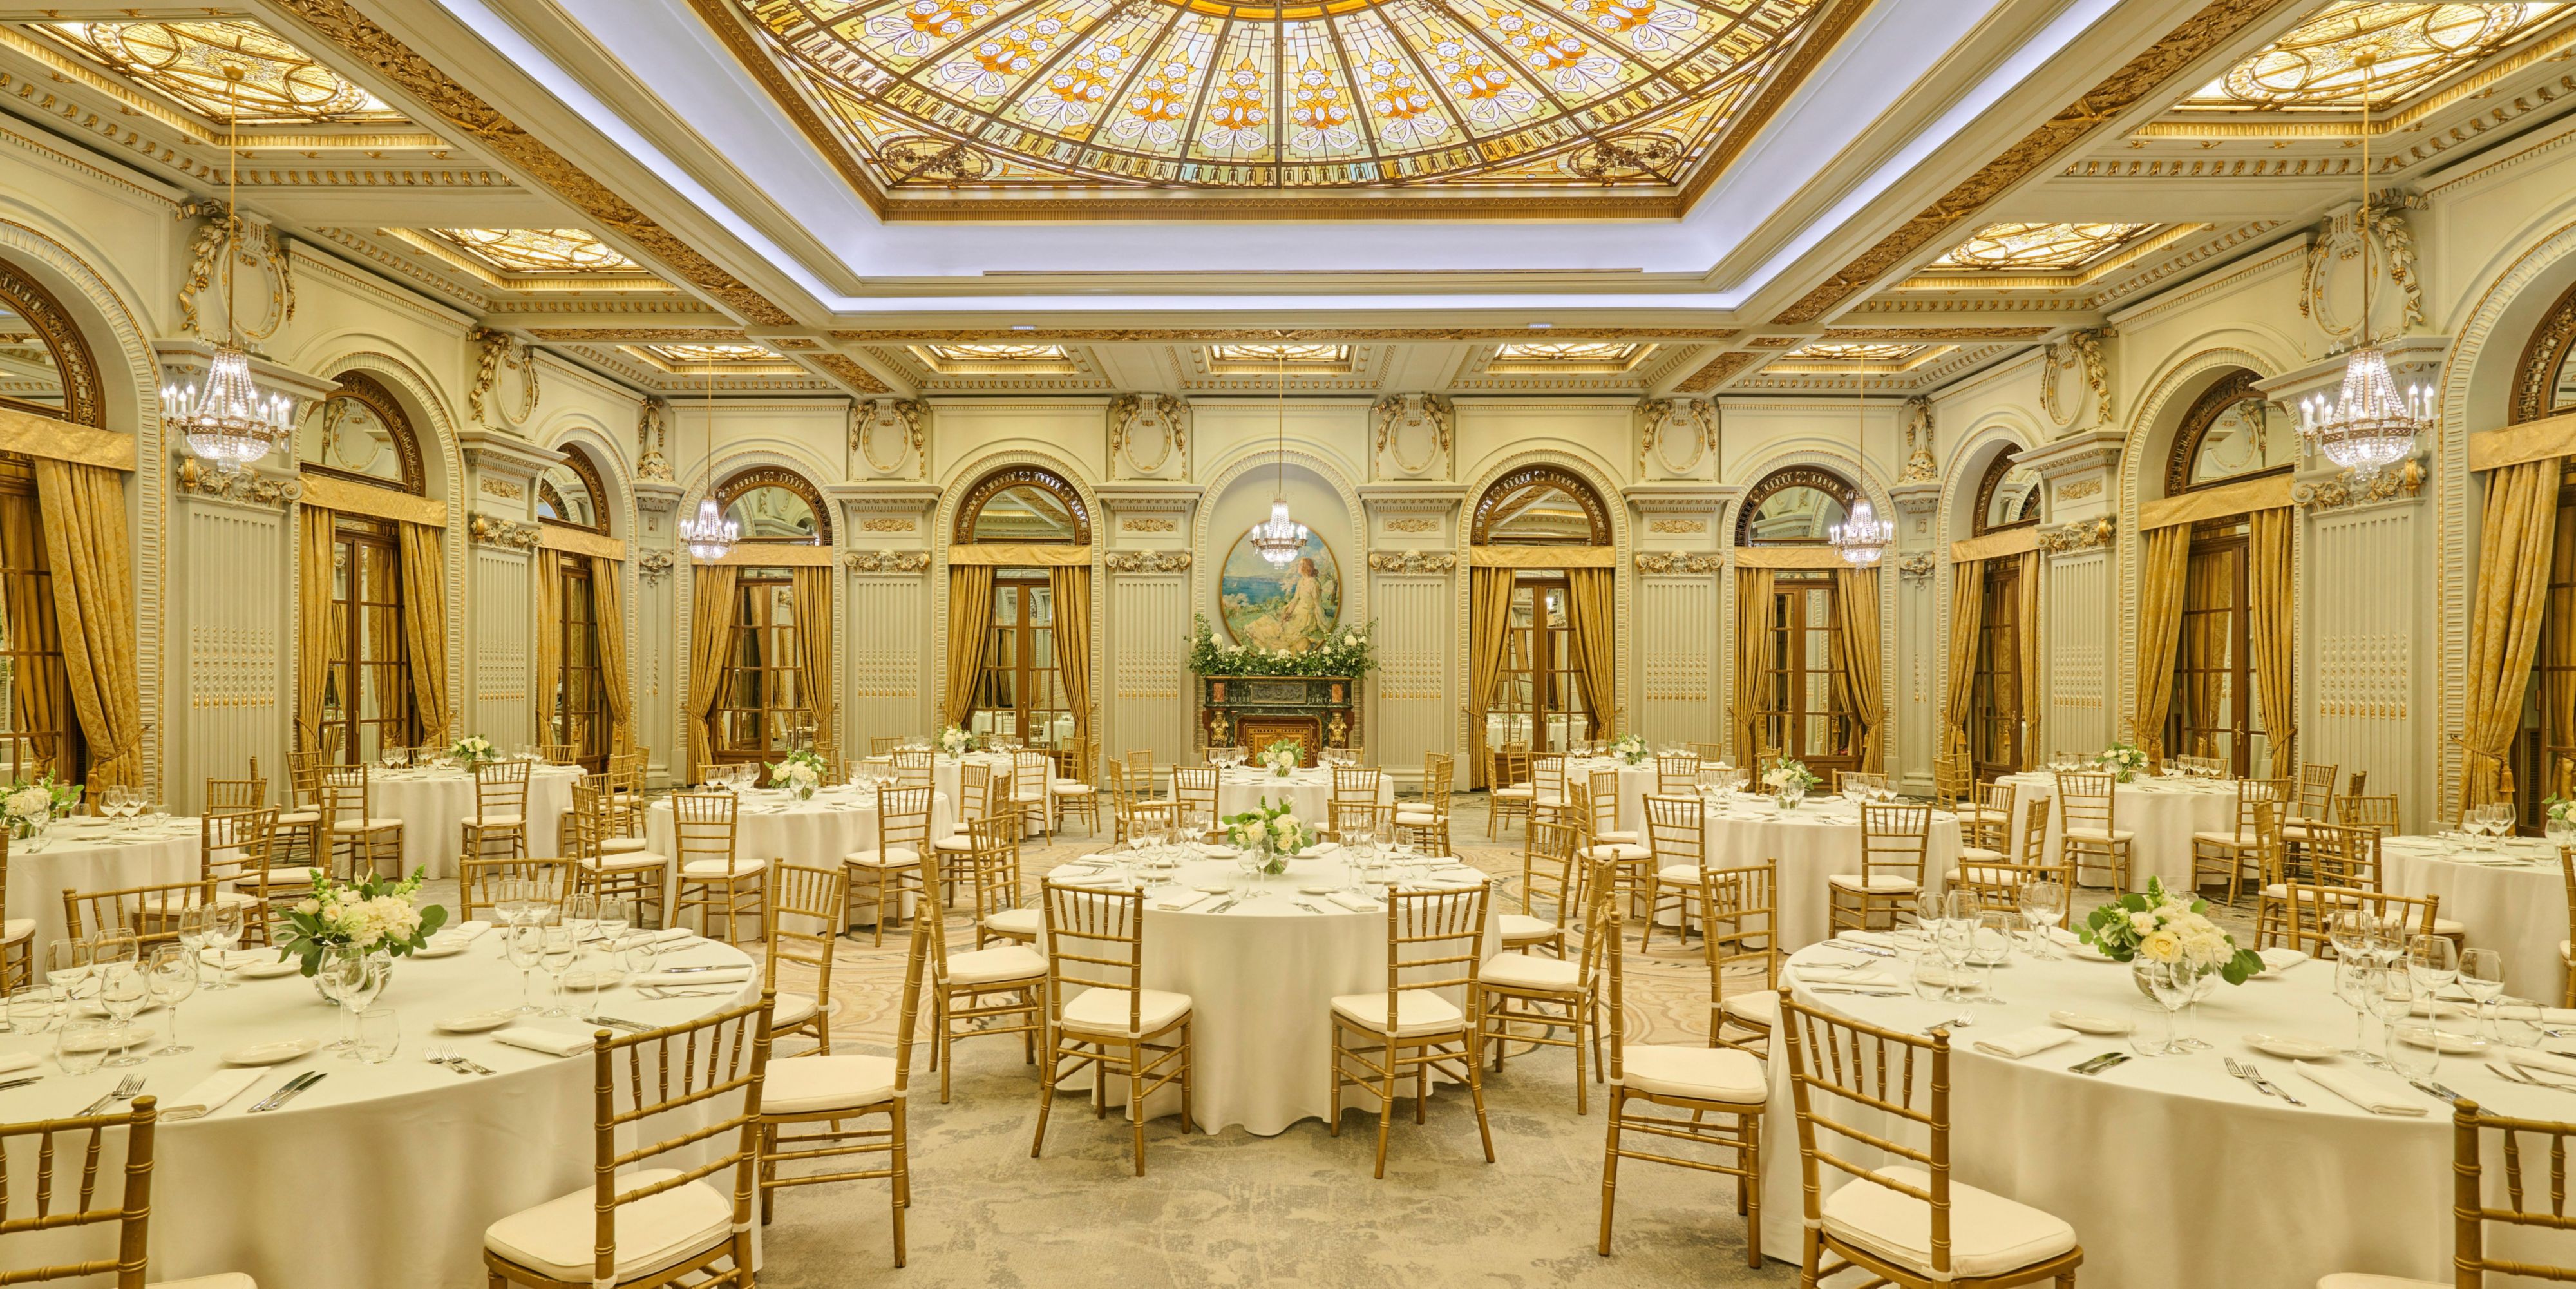 Experience grandeur at Le Diplomate Ballroom, a nationally recognized historical monument. Immerse yourself in its architectural splendor, adorned with golden leaf accents and a stunning stained glass ceiling—a truly enchanting venue for your memorable day.